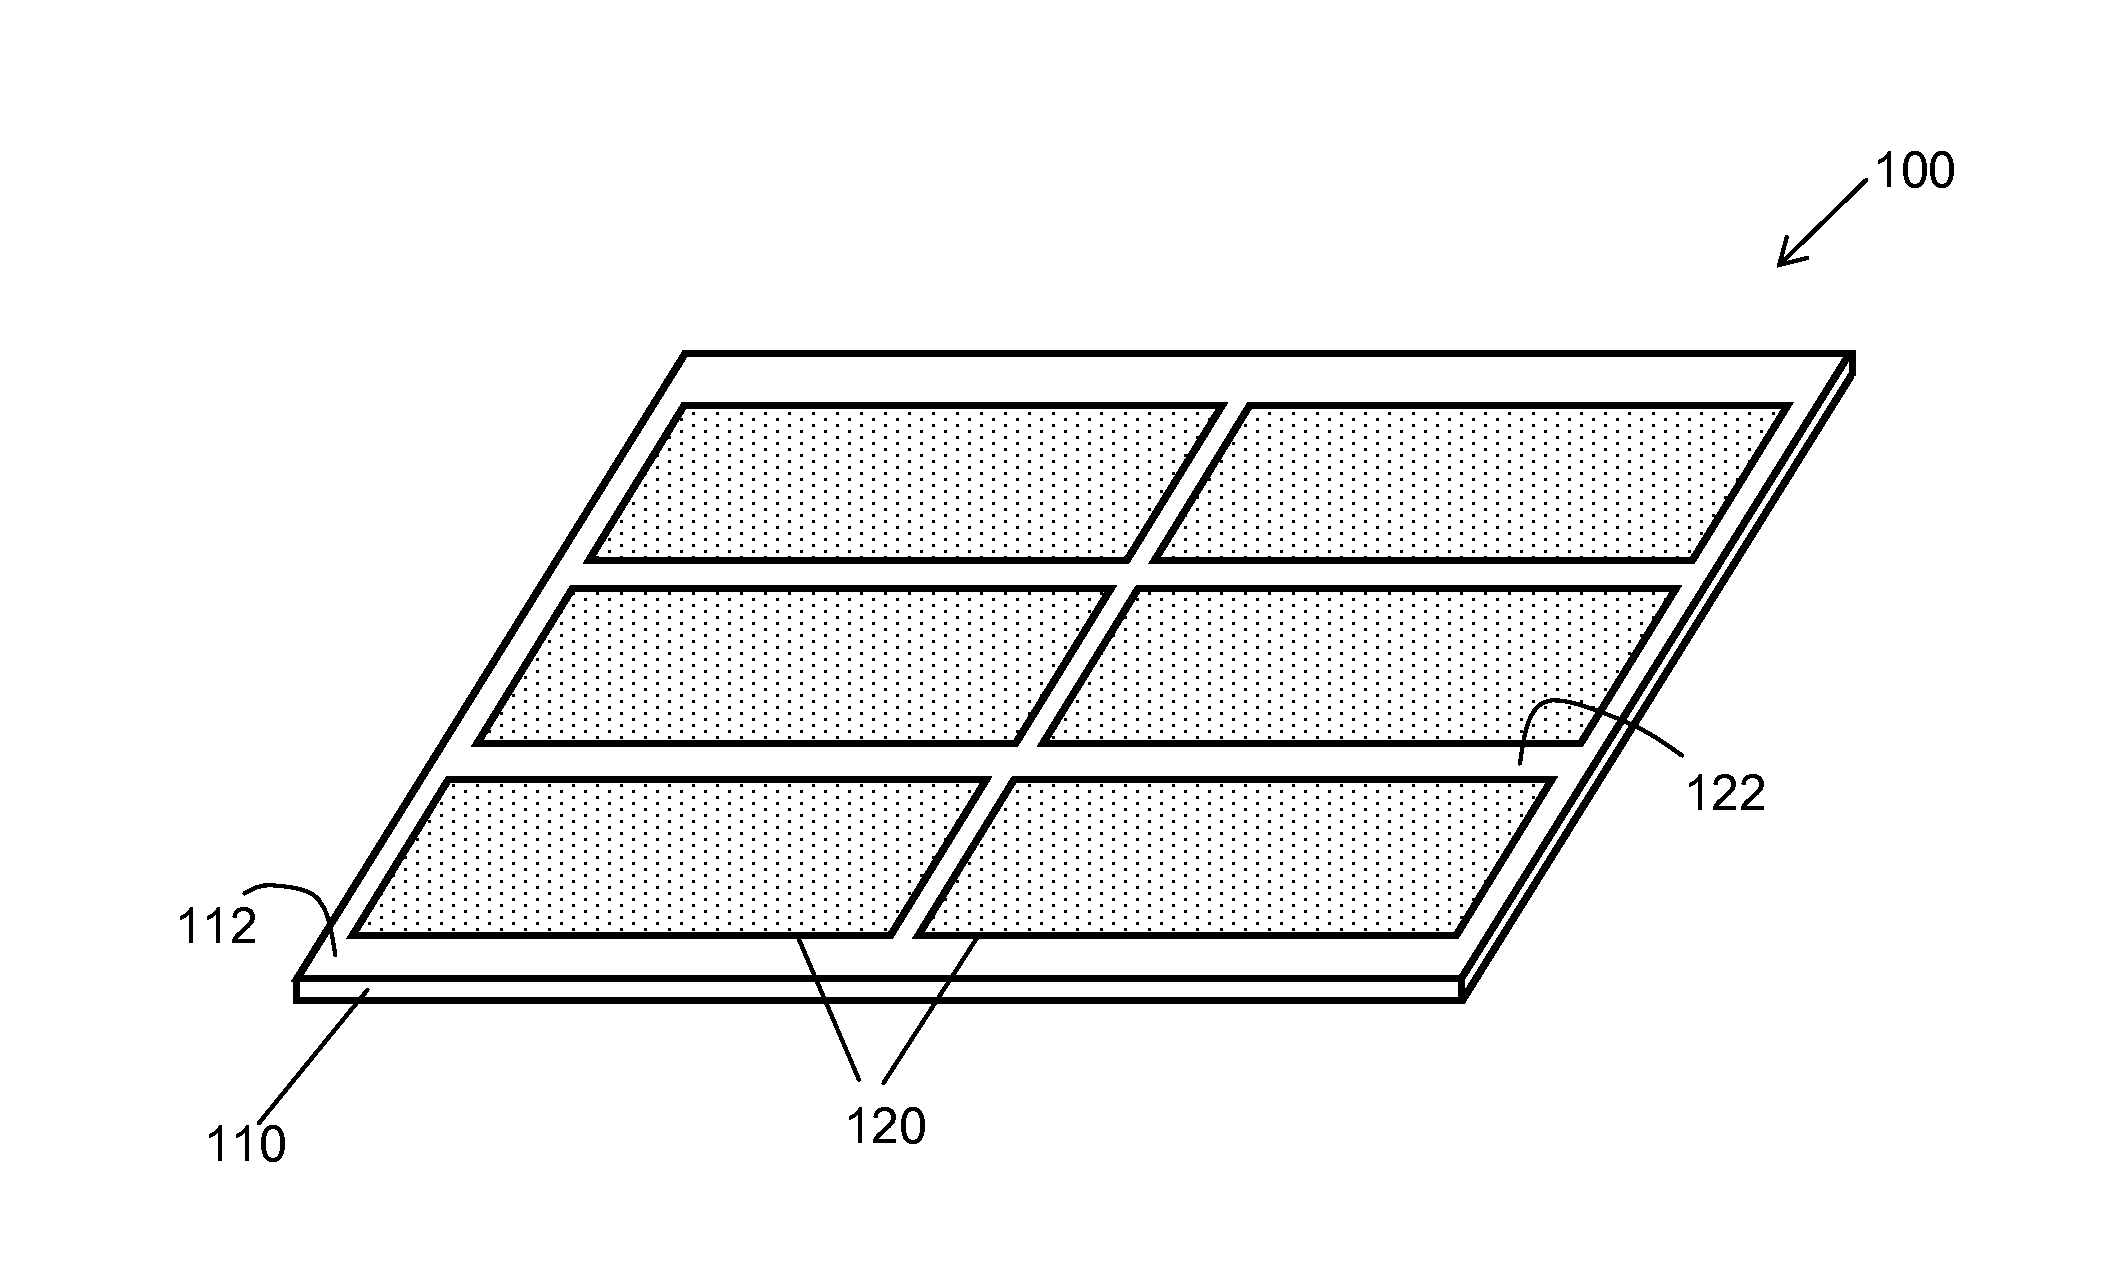 Roofing and Siding Products Having Receptor Zones and Photovoltaic Roofing and Siding Elements and Systems Using Them